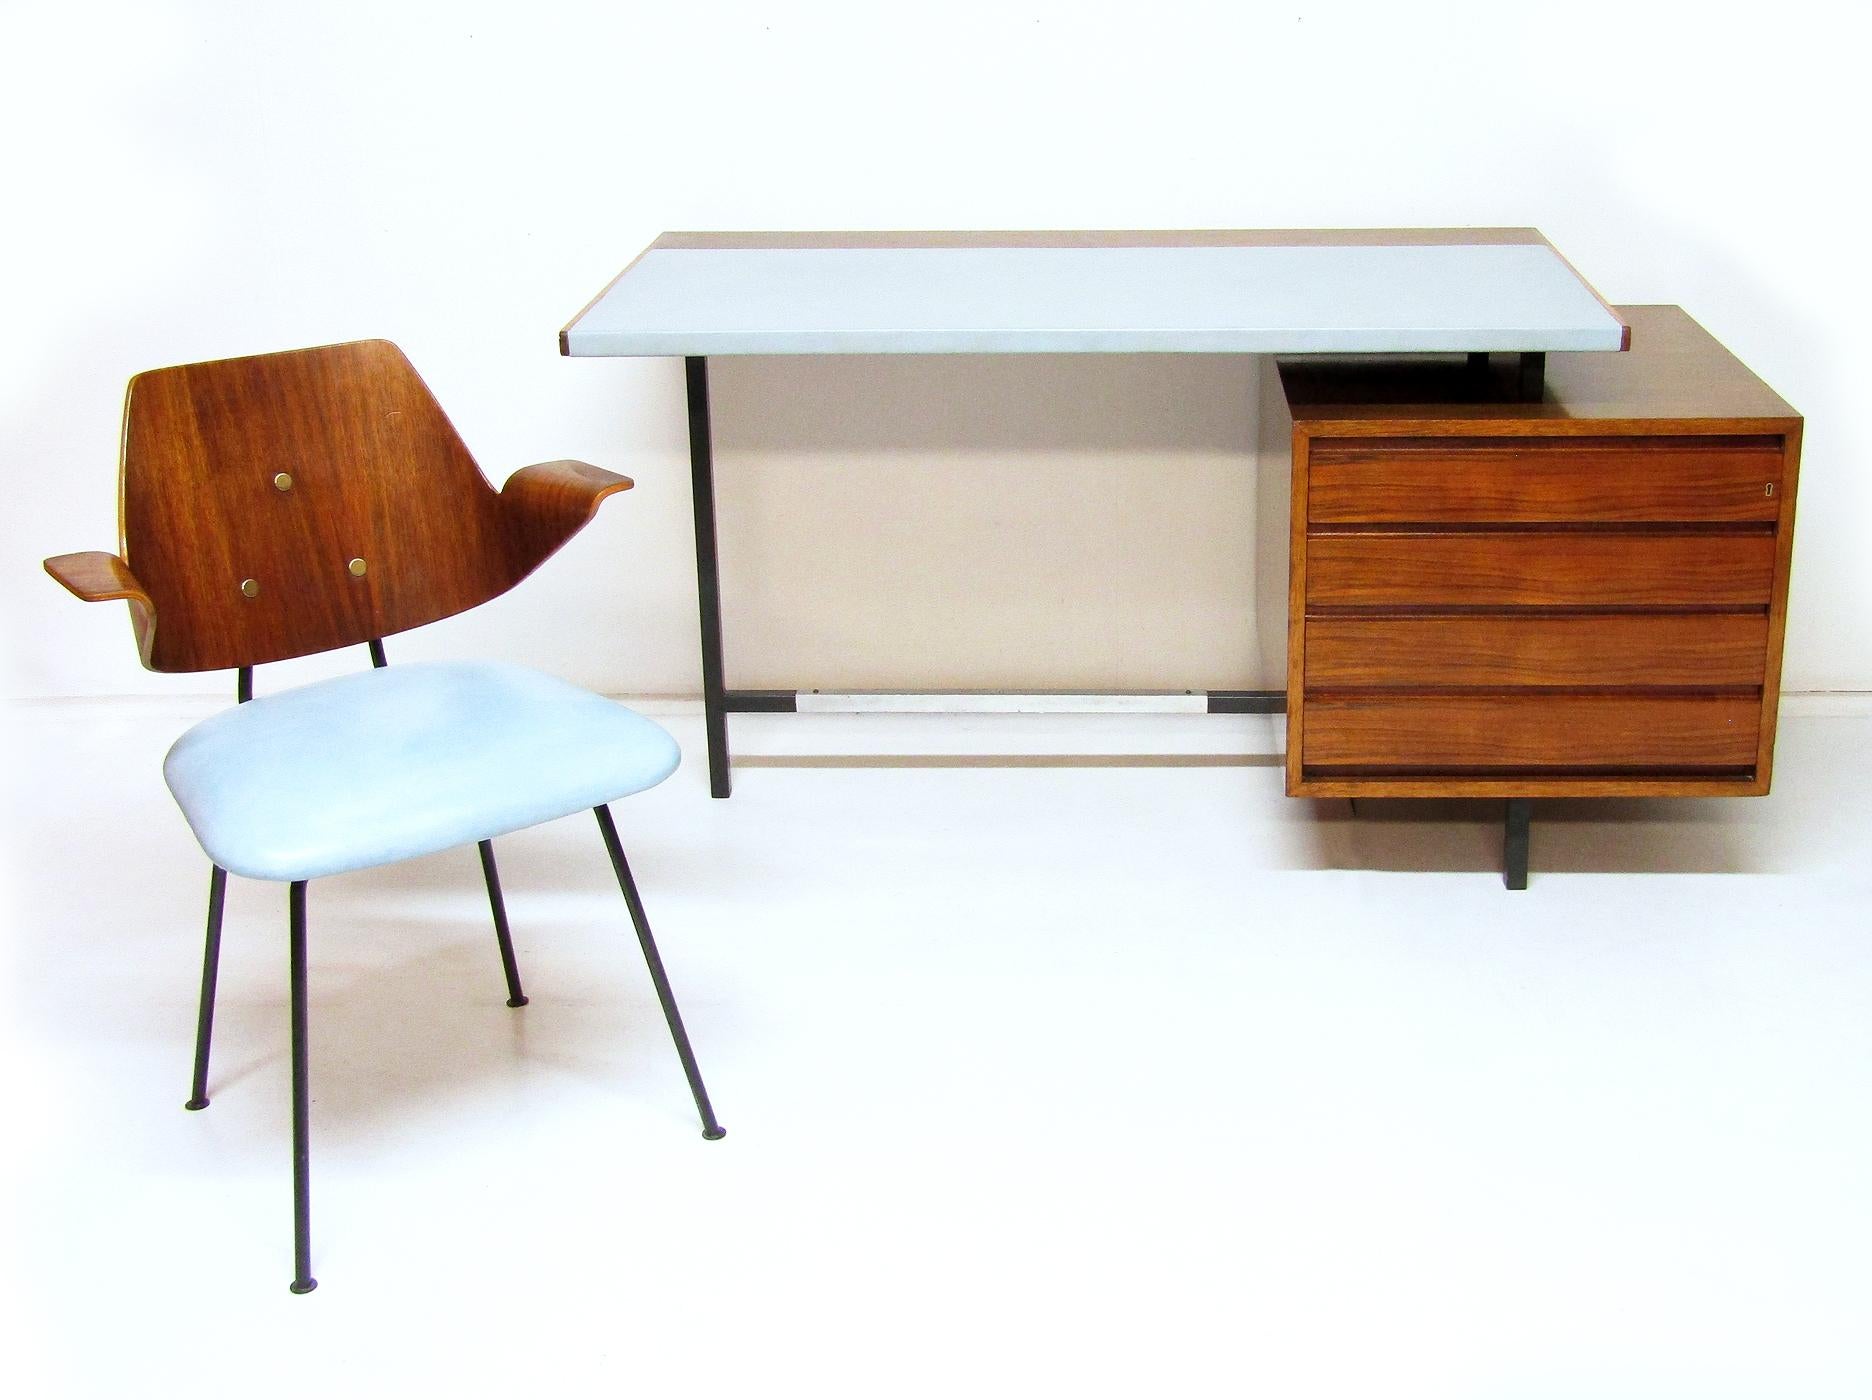 1950s Modernist Desk & Chair Set in Walnut & Leather by Robin Day for Hille 8